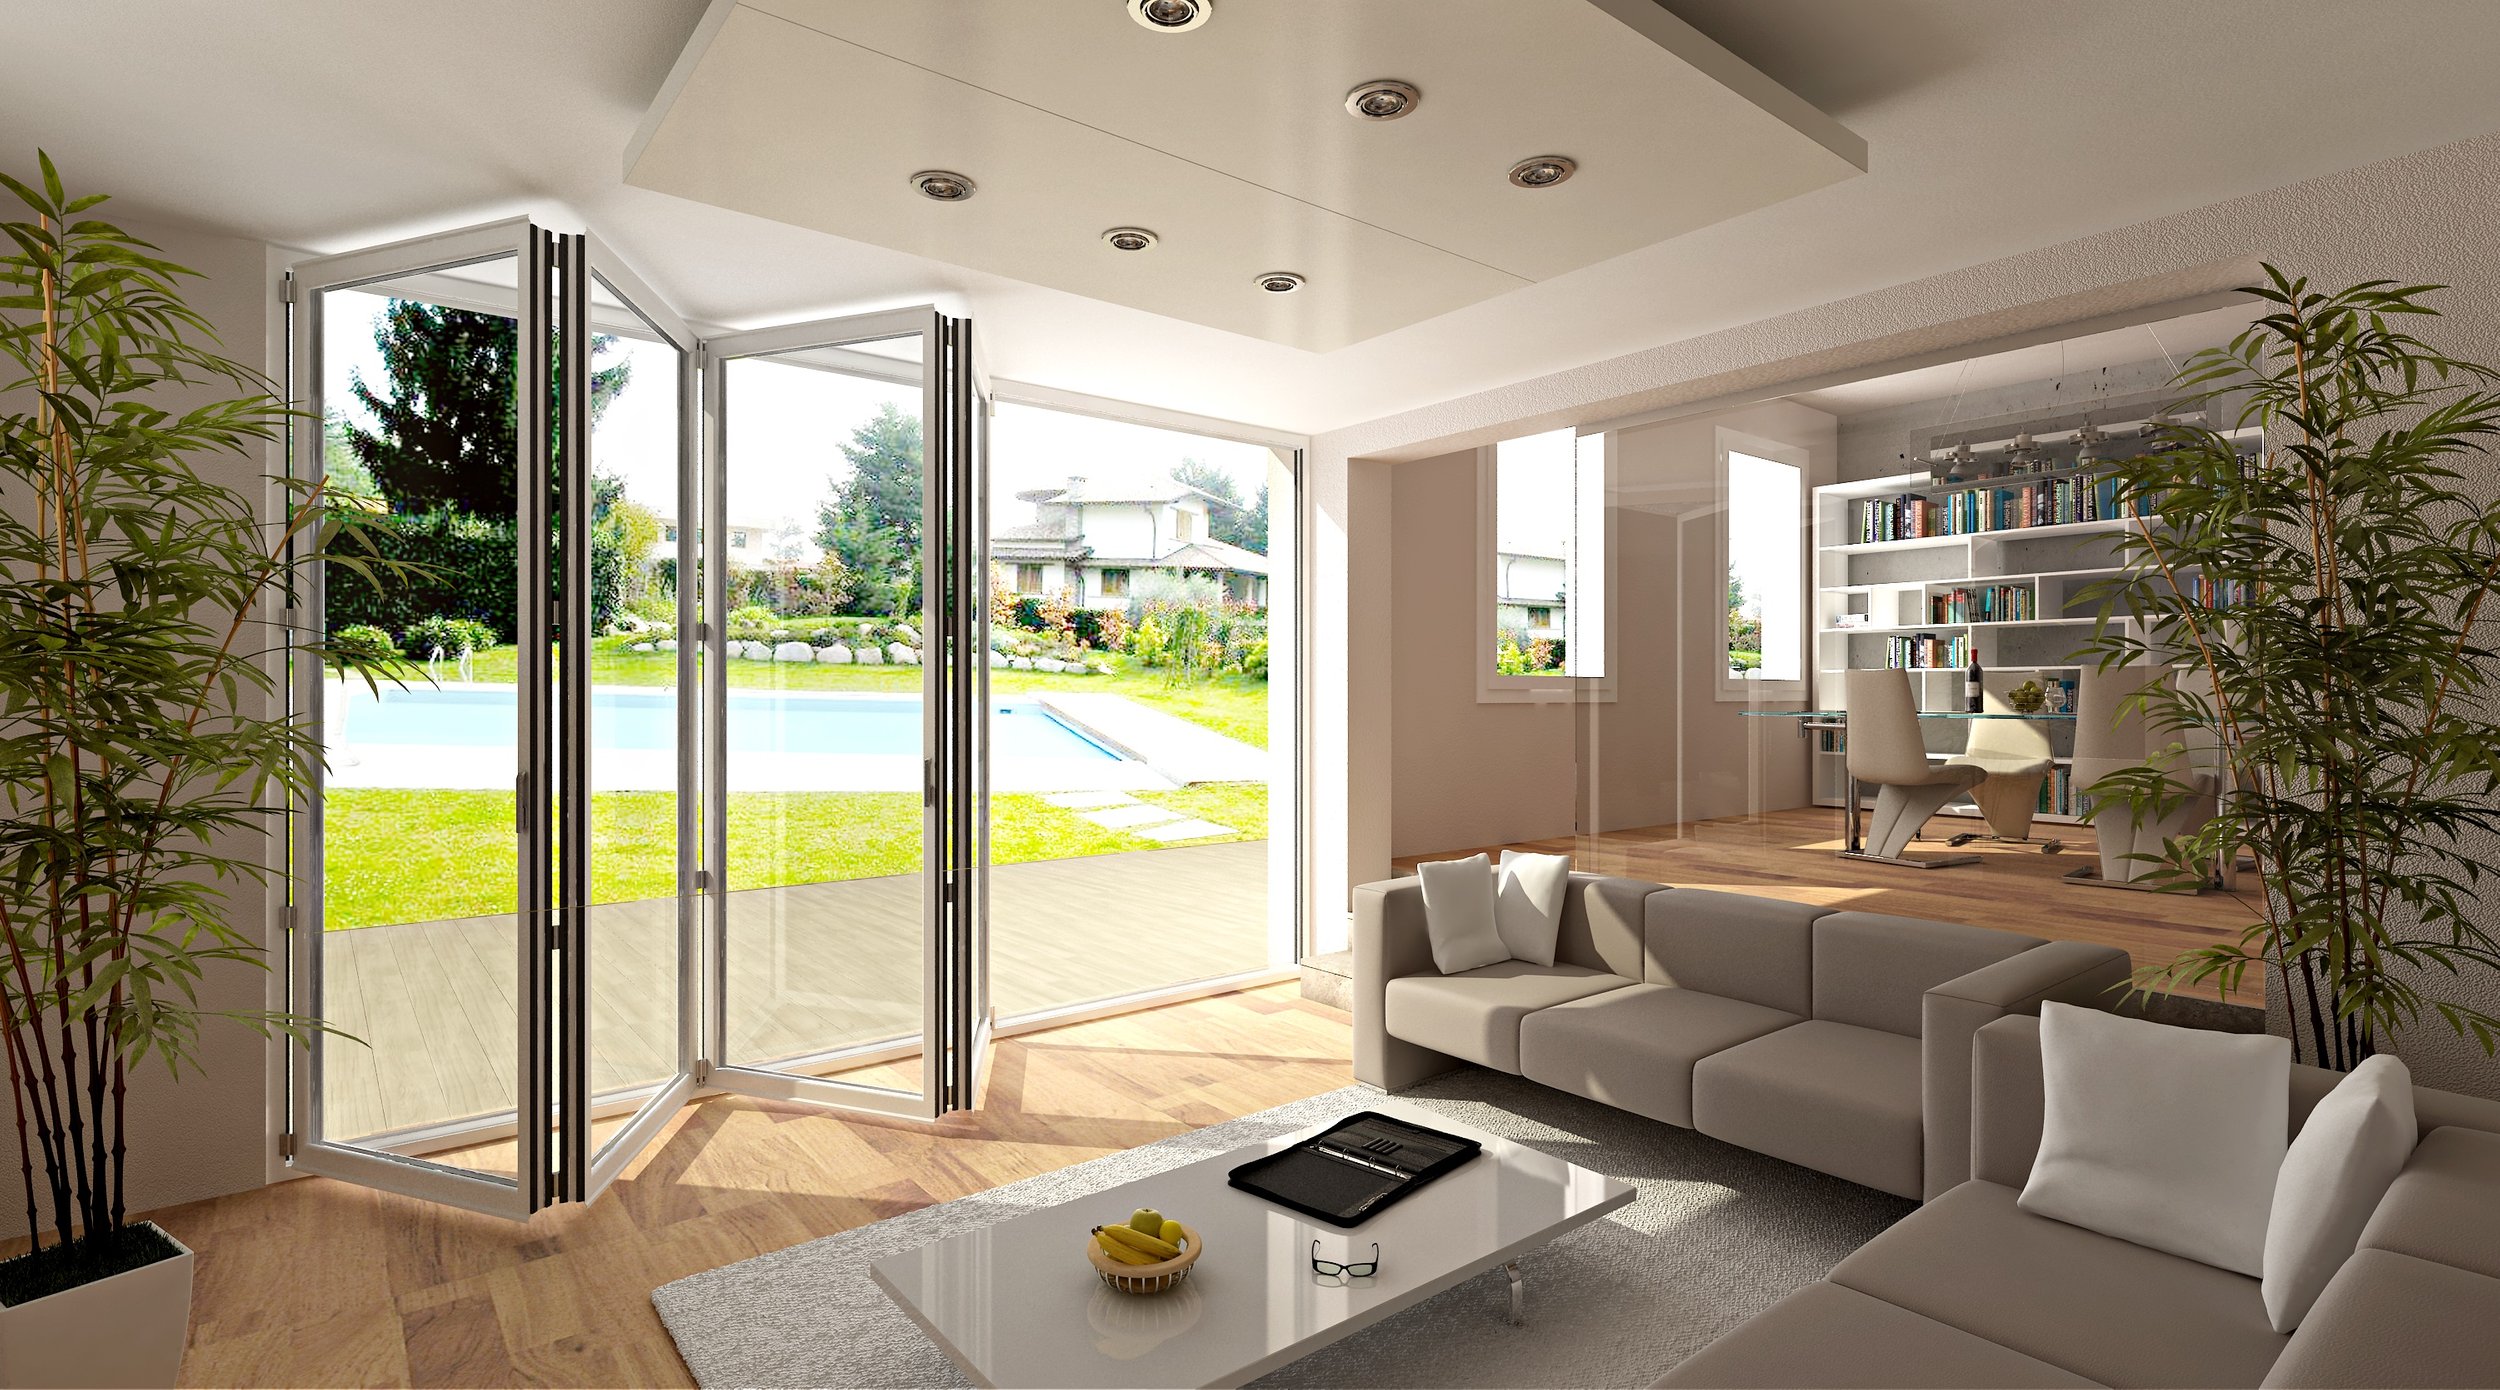 Floor to ceiling bi-folding glass doors are a space saving solution in a compact bedroom